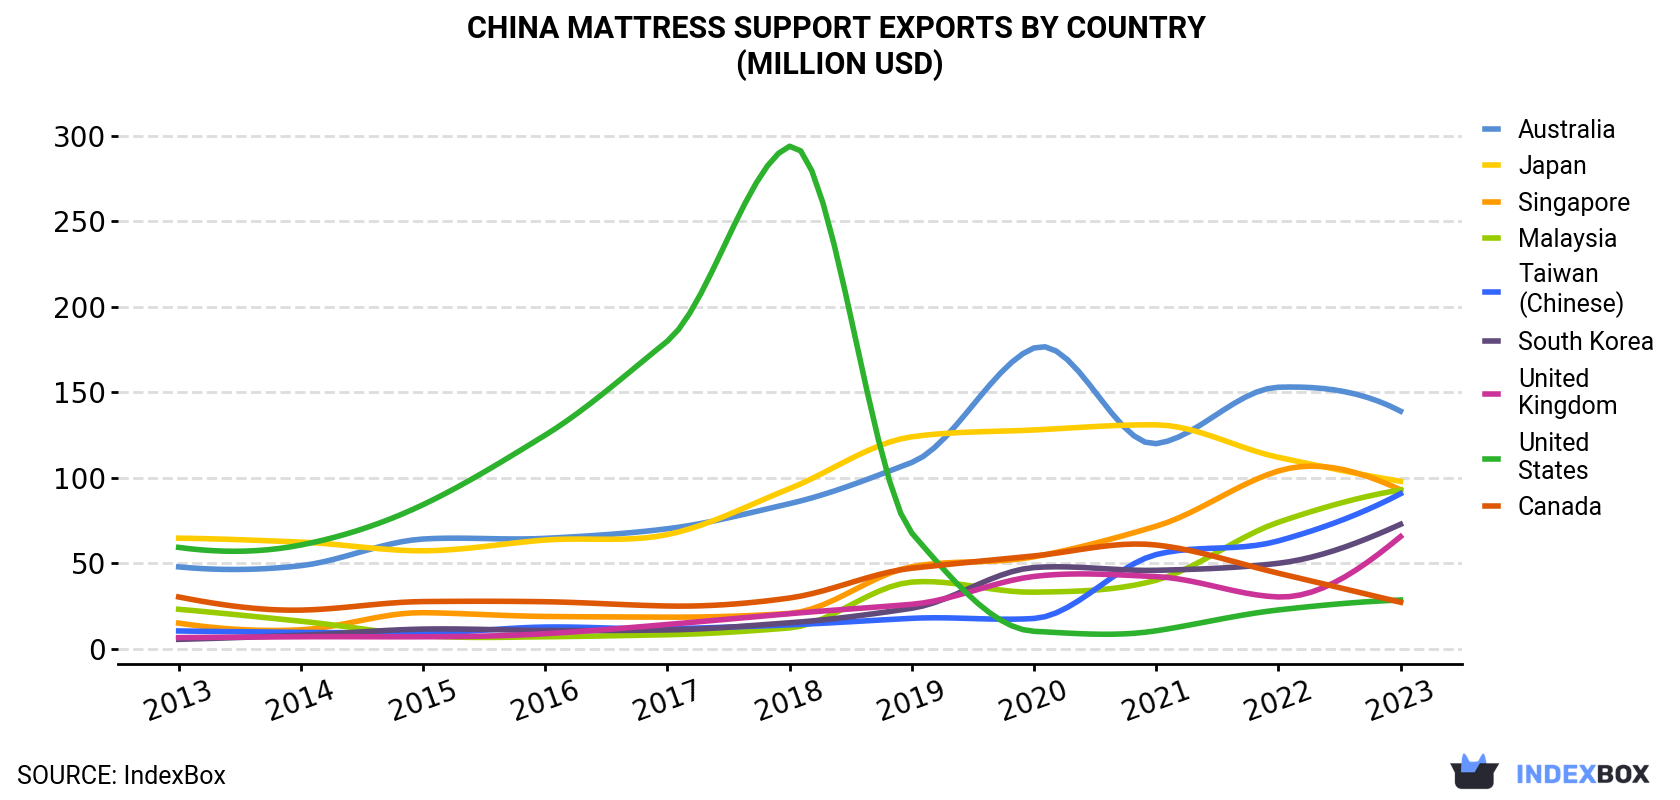 China Mattress Support Exports By Country (Million USD)